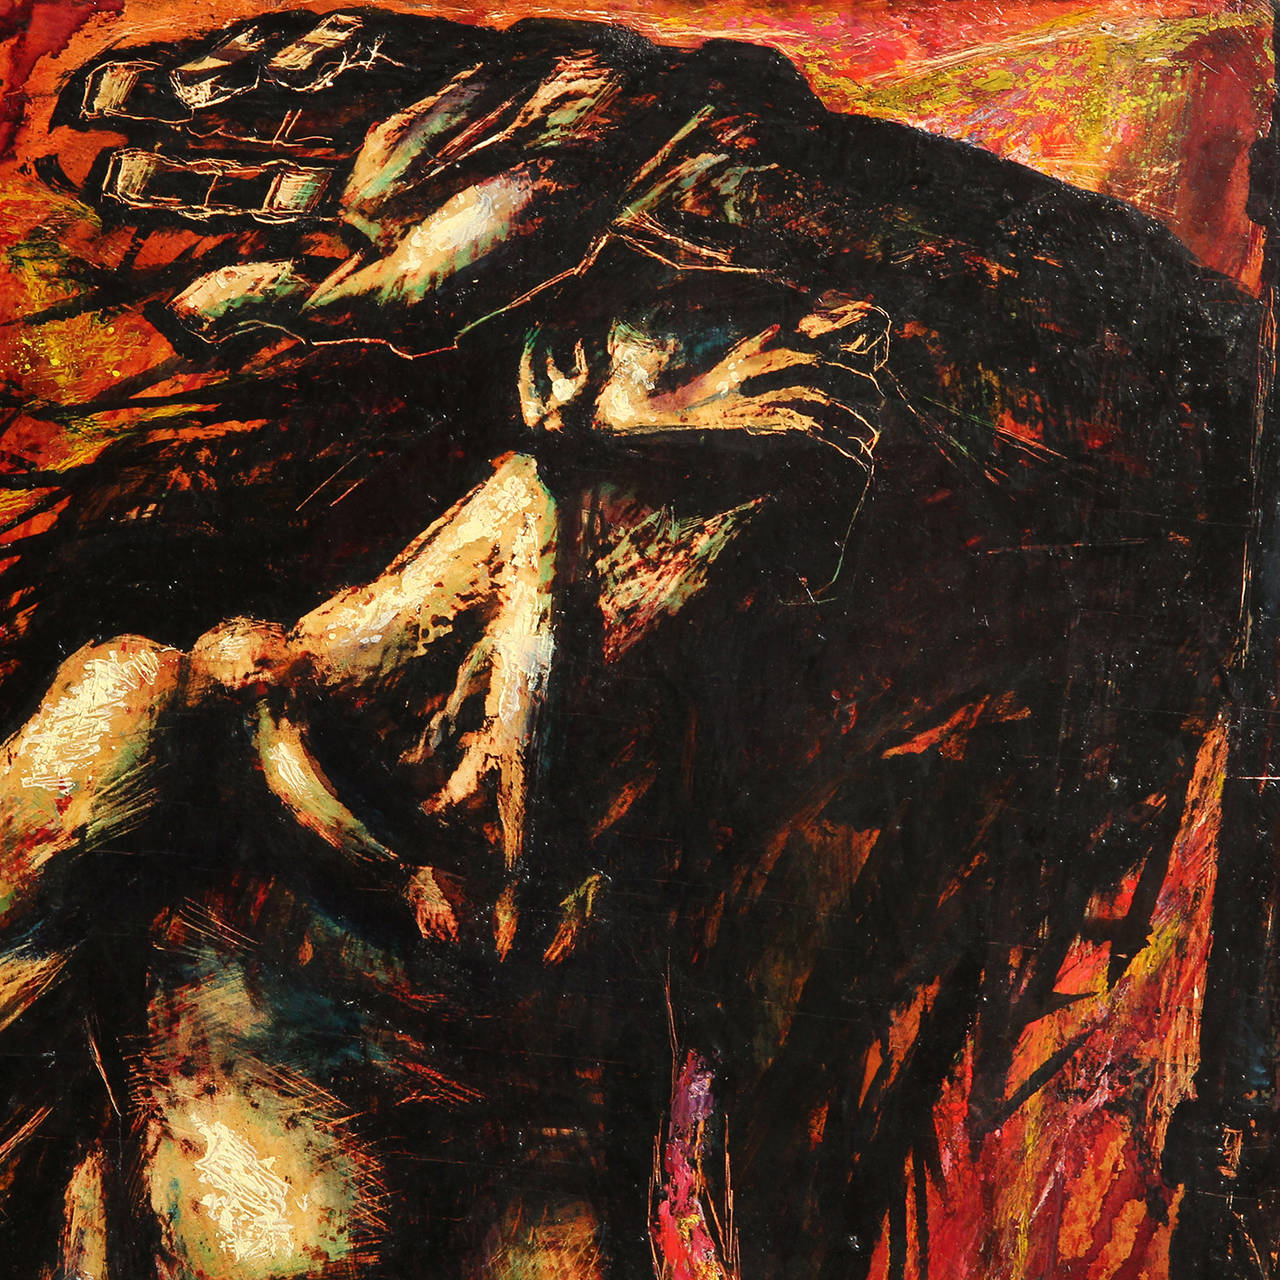 A painting depicting a pair of highly emotive figures set against a color-field of fire toned hues. The piece retains its exhibition label from the National Academy of Design